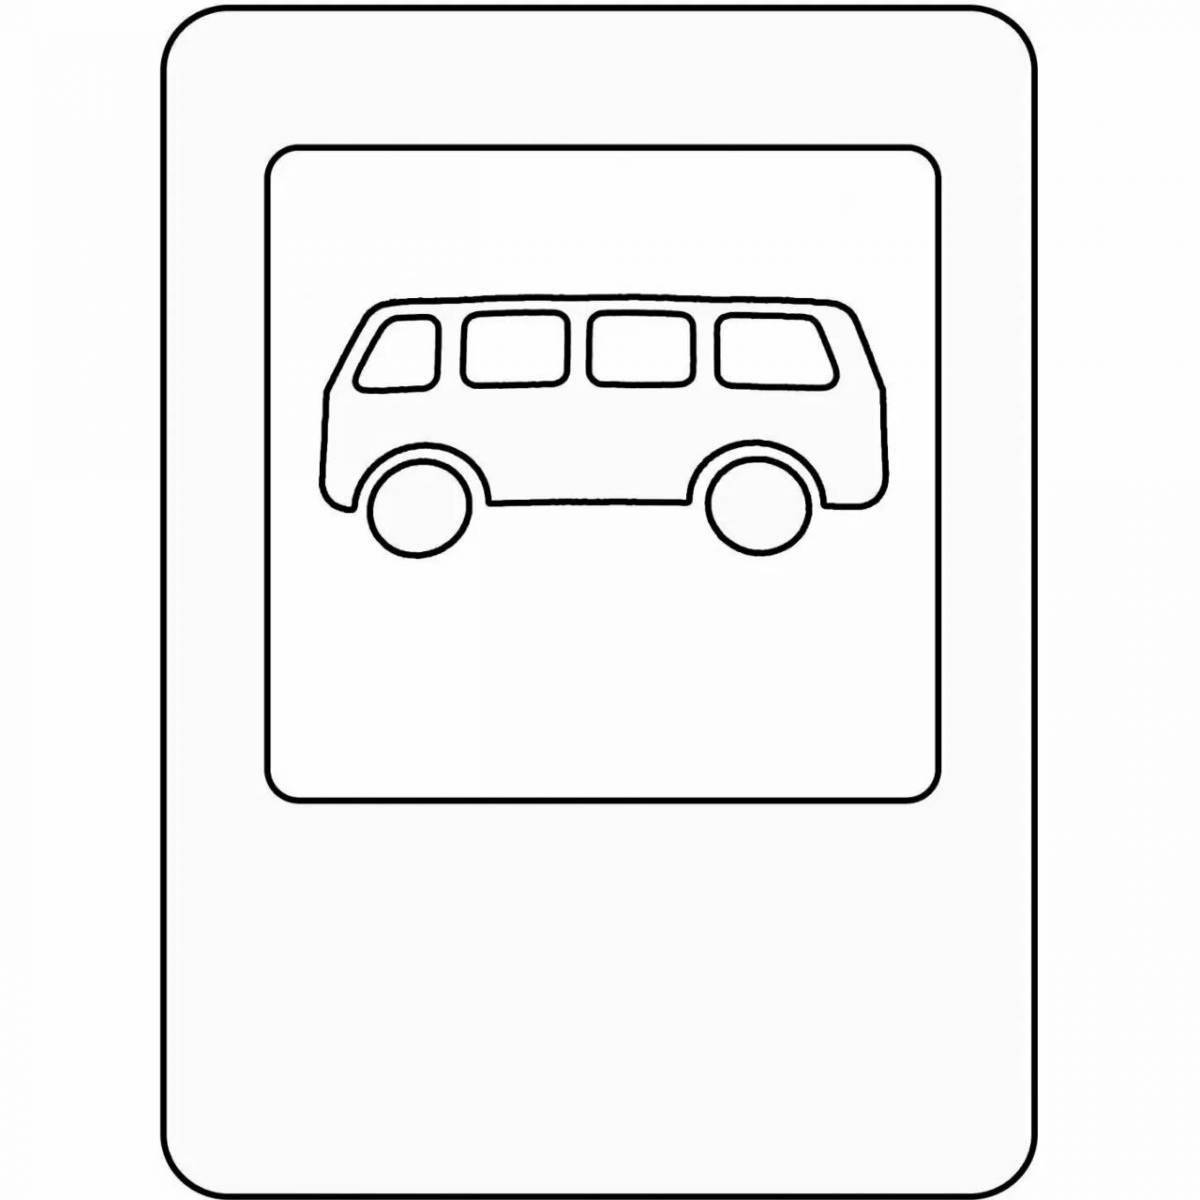 Coloring pages with traffic signs for kids